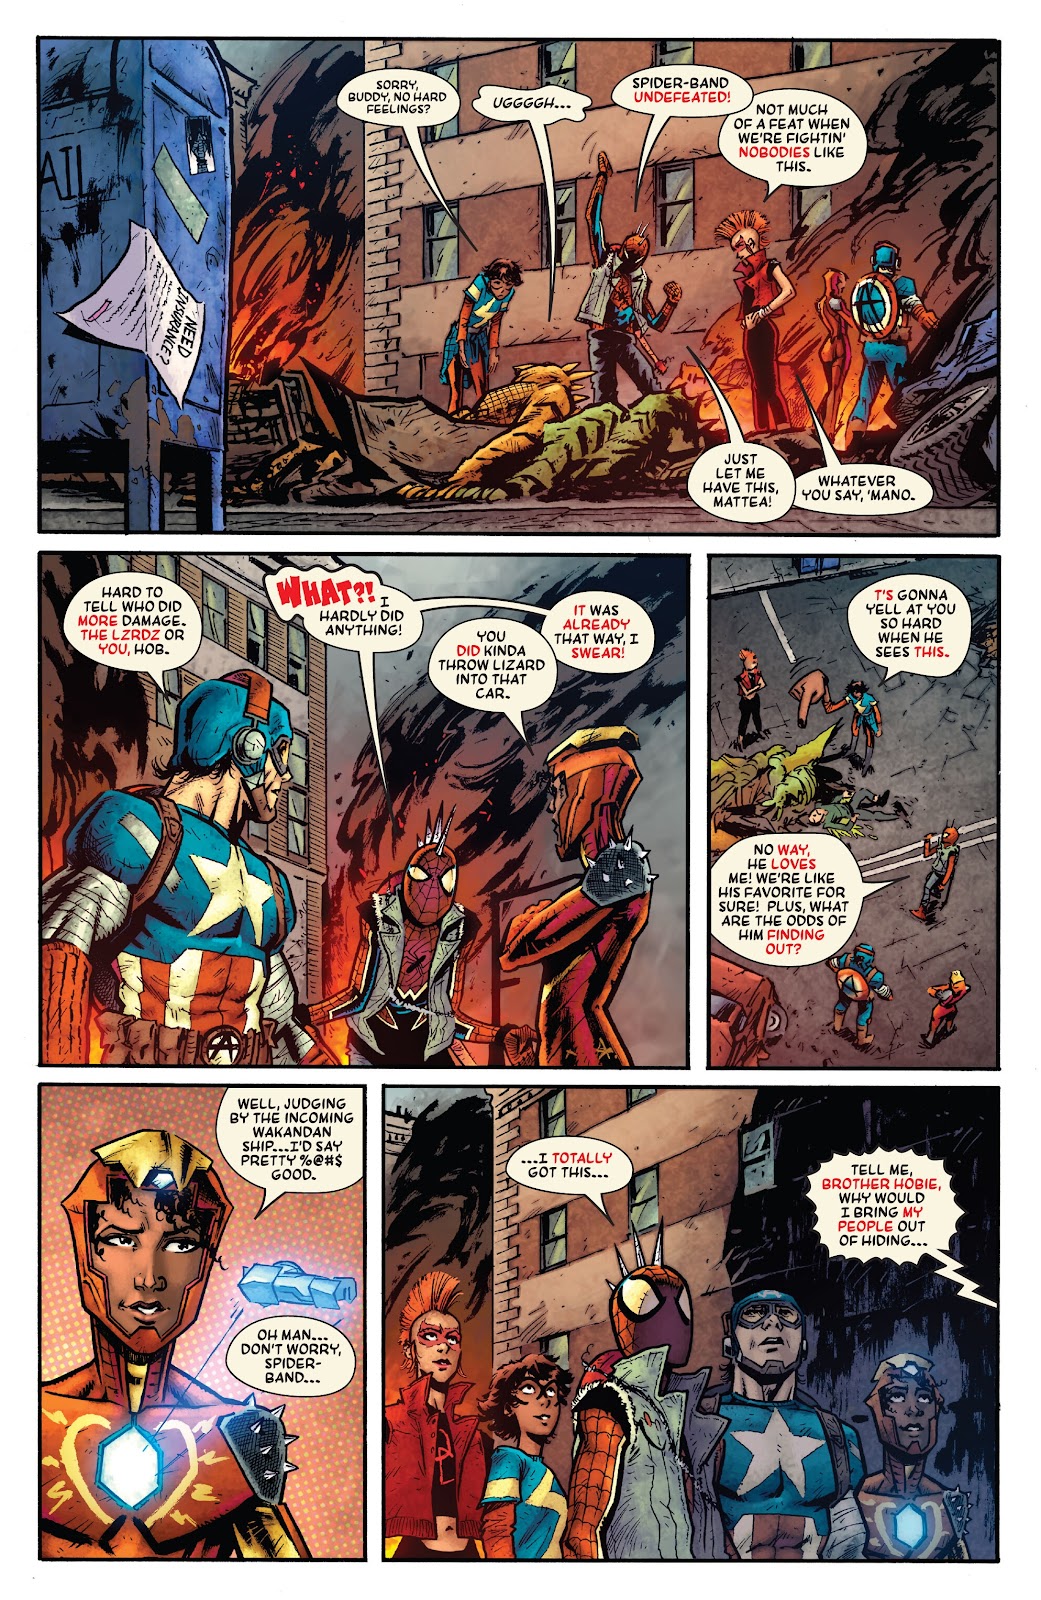 Spider-Punk: Arms Race issue 1 - Page 7